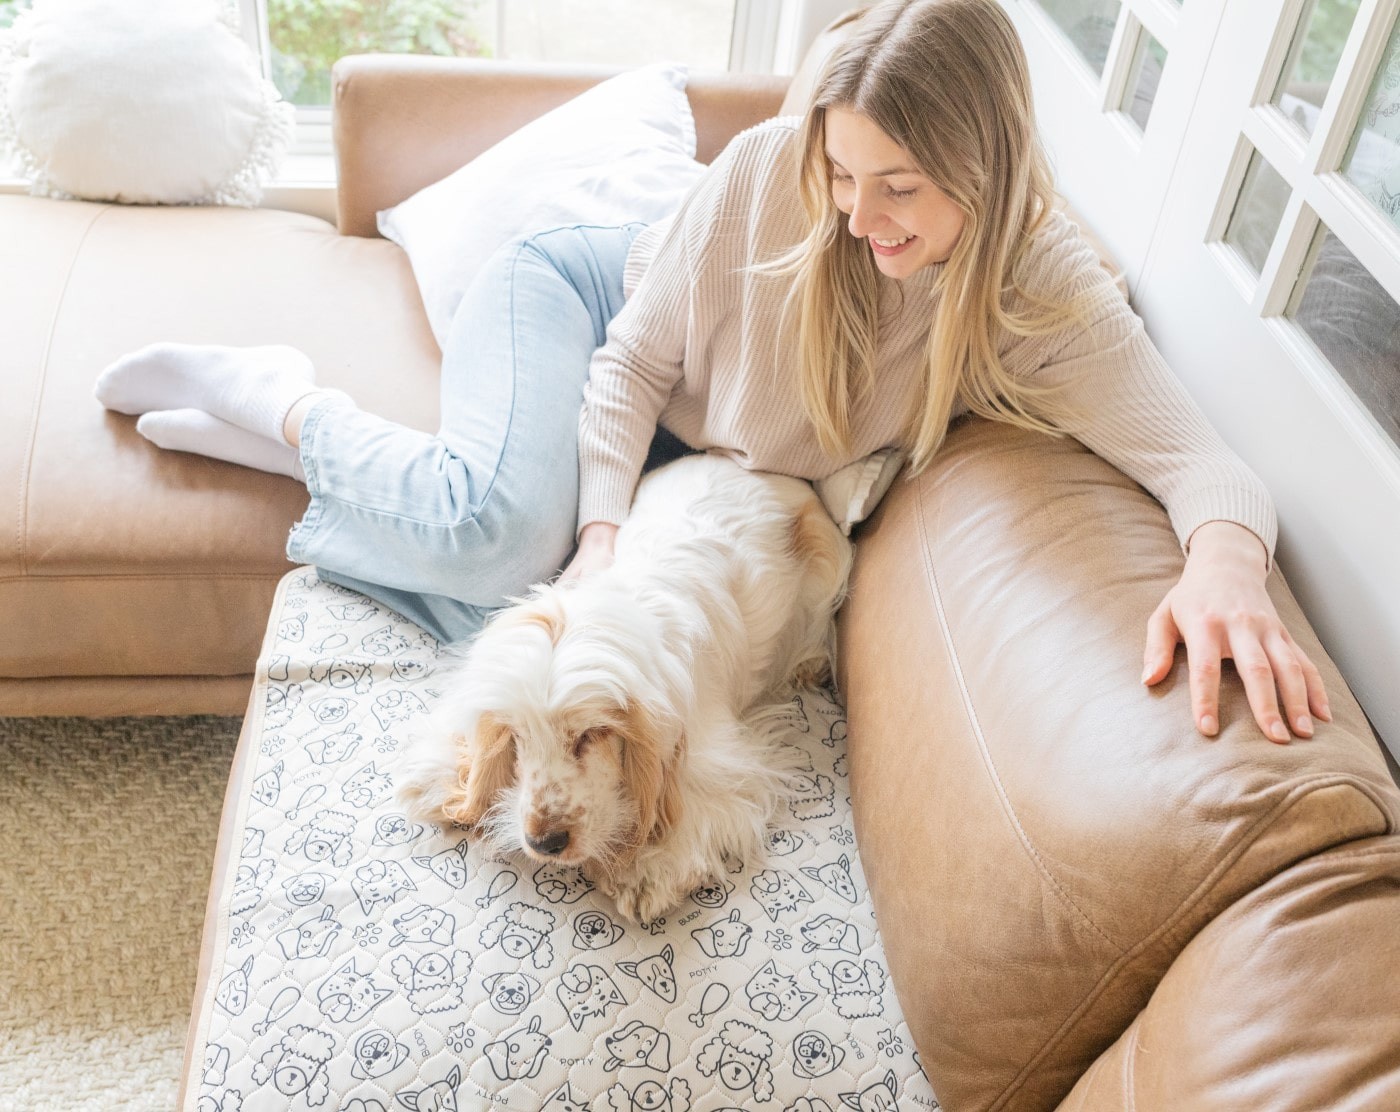 A girl and her old dog relaxing on the couch, with the dog on a reusable potty pad